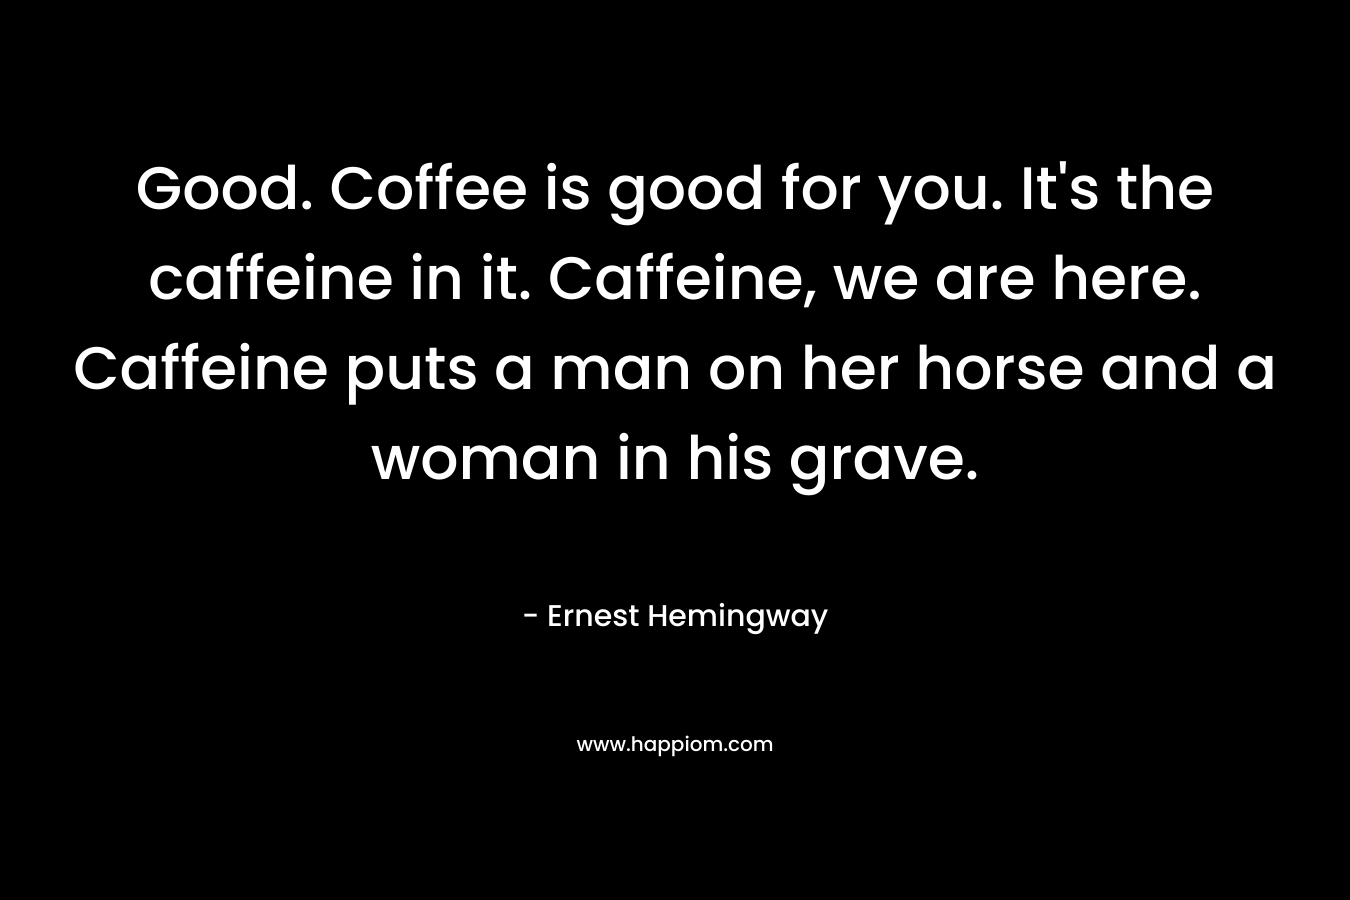 Good. Coffee is good for you. It's the caffeine in it. Caffeine, we are here. Caffeine puts a man on her horse and a woman in his grave.